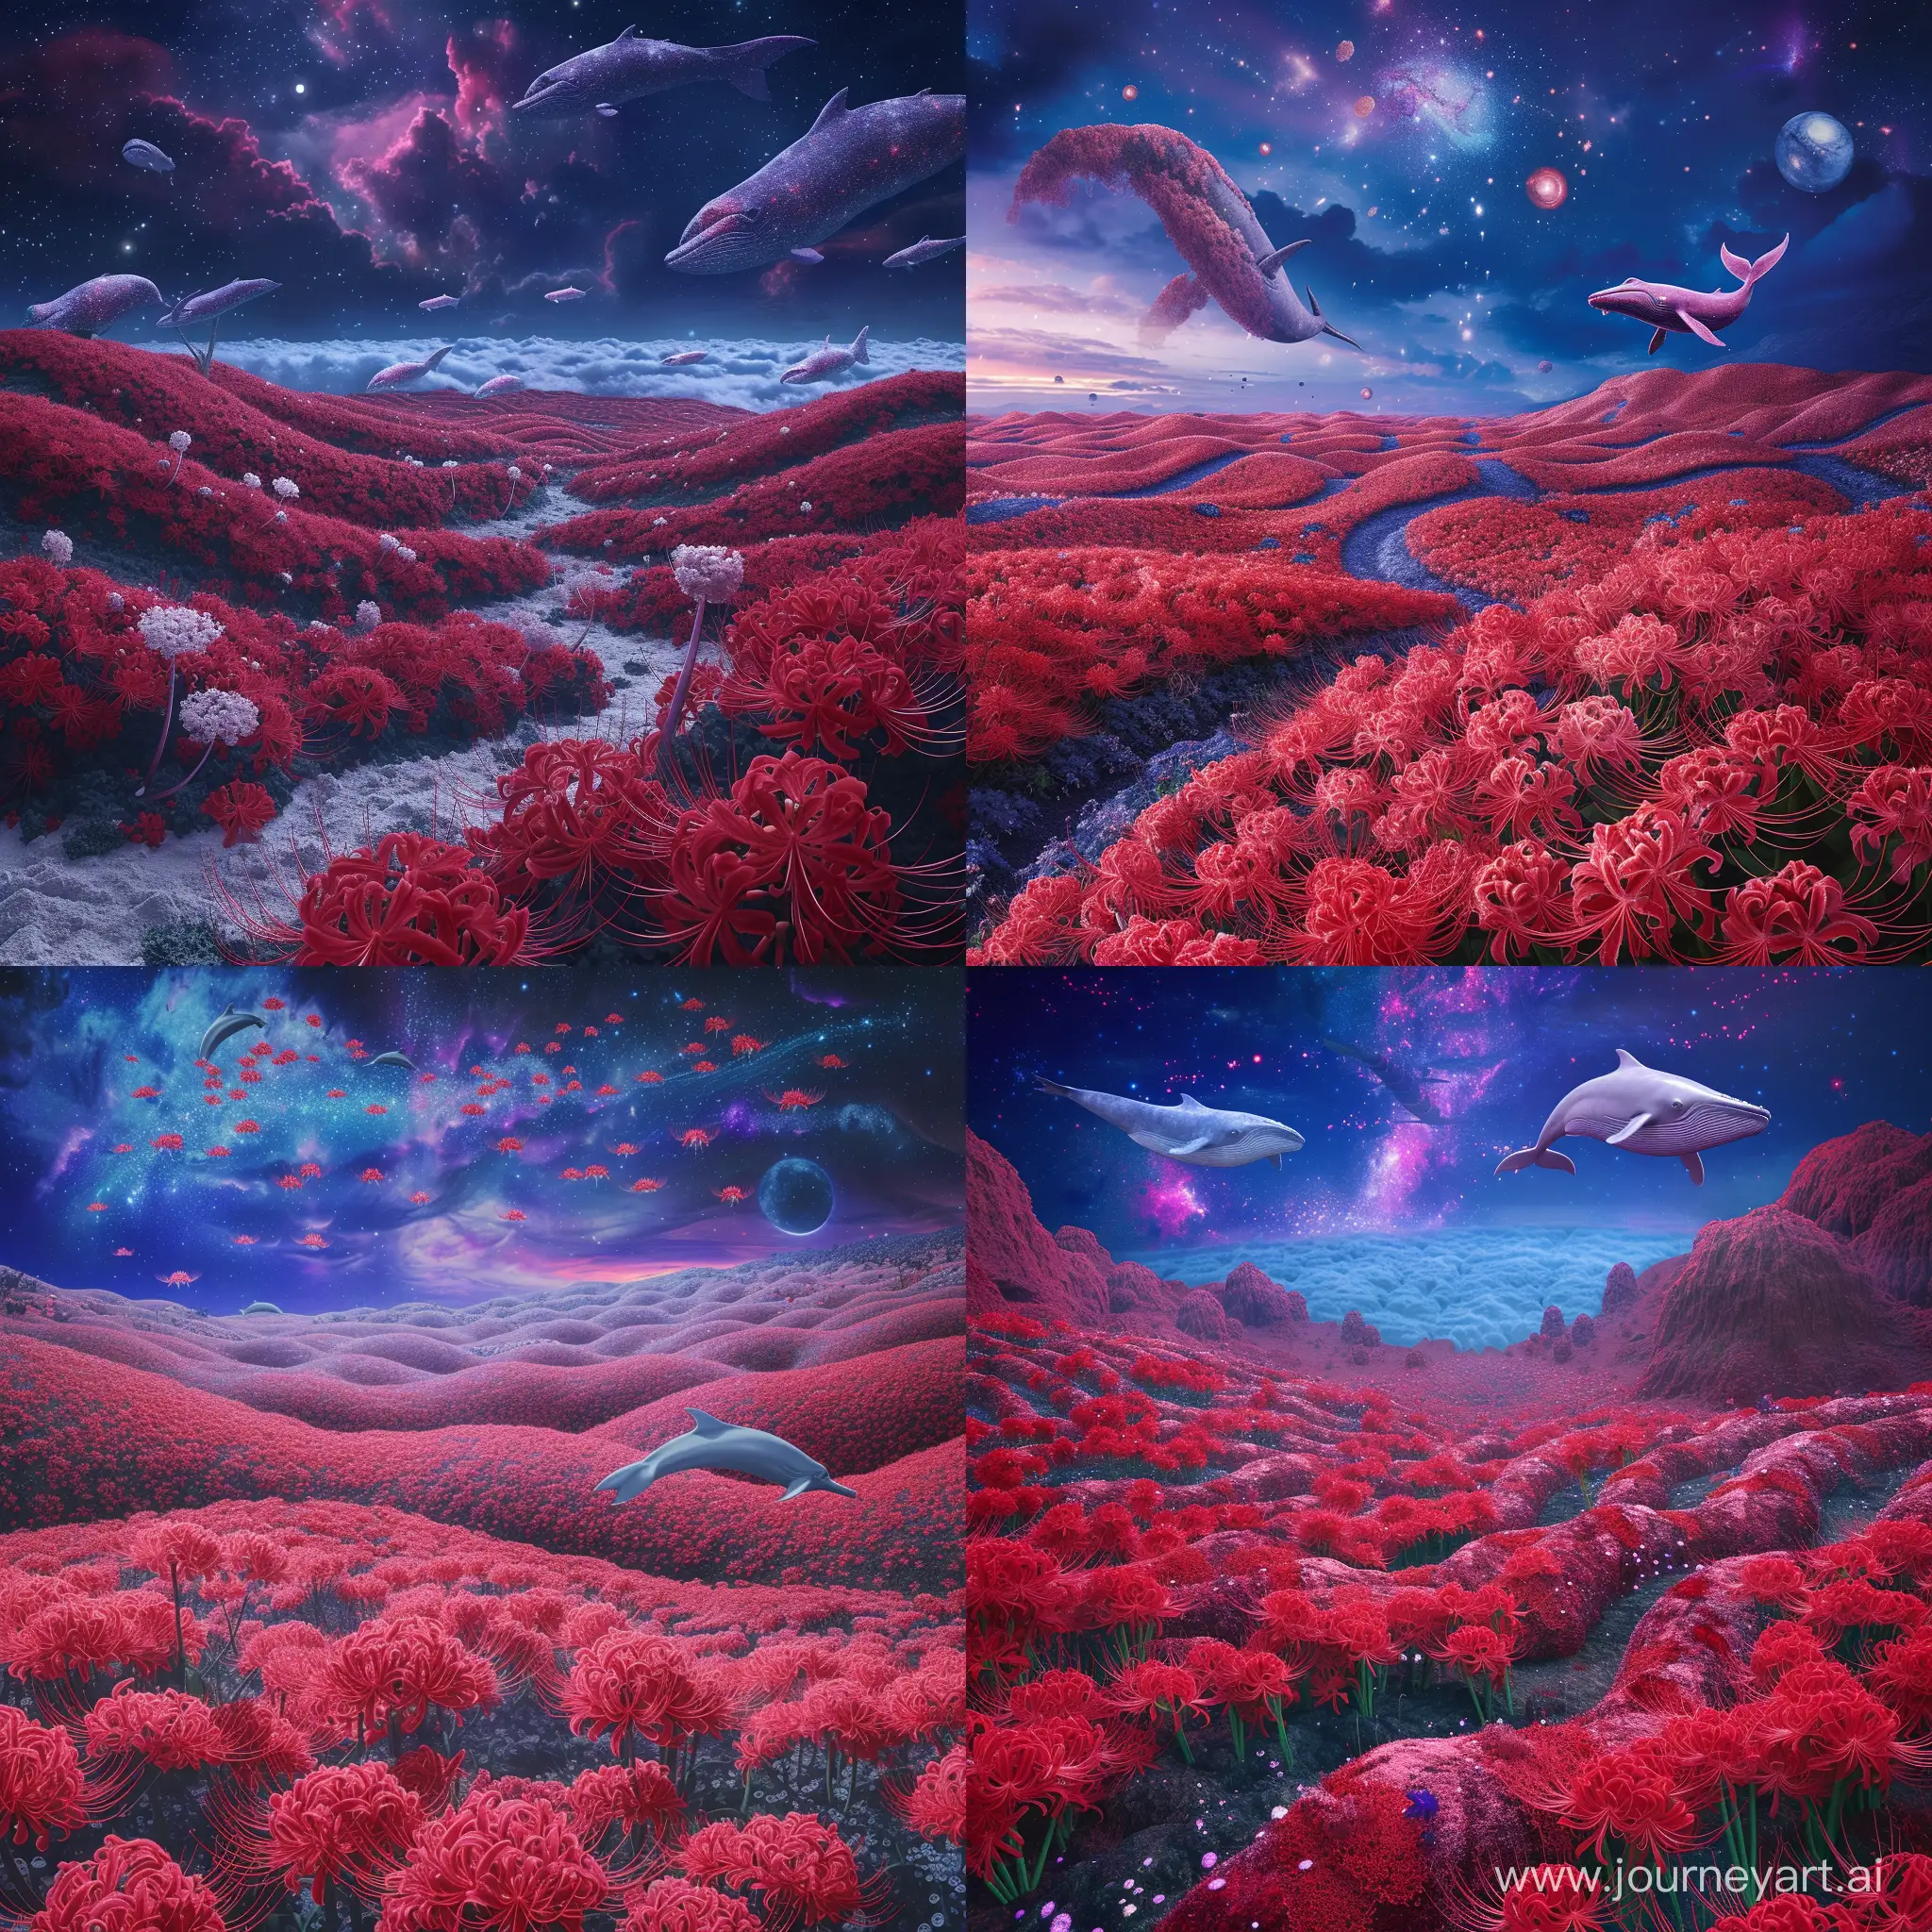 Surreal-Garden-of-Red-Lycoris-Radiata-and-Celestial-Whales